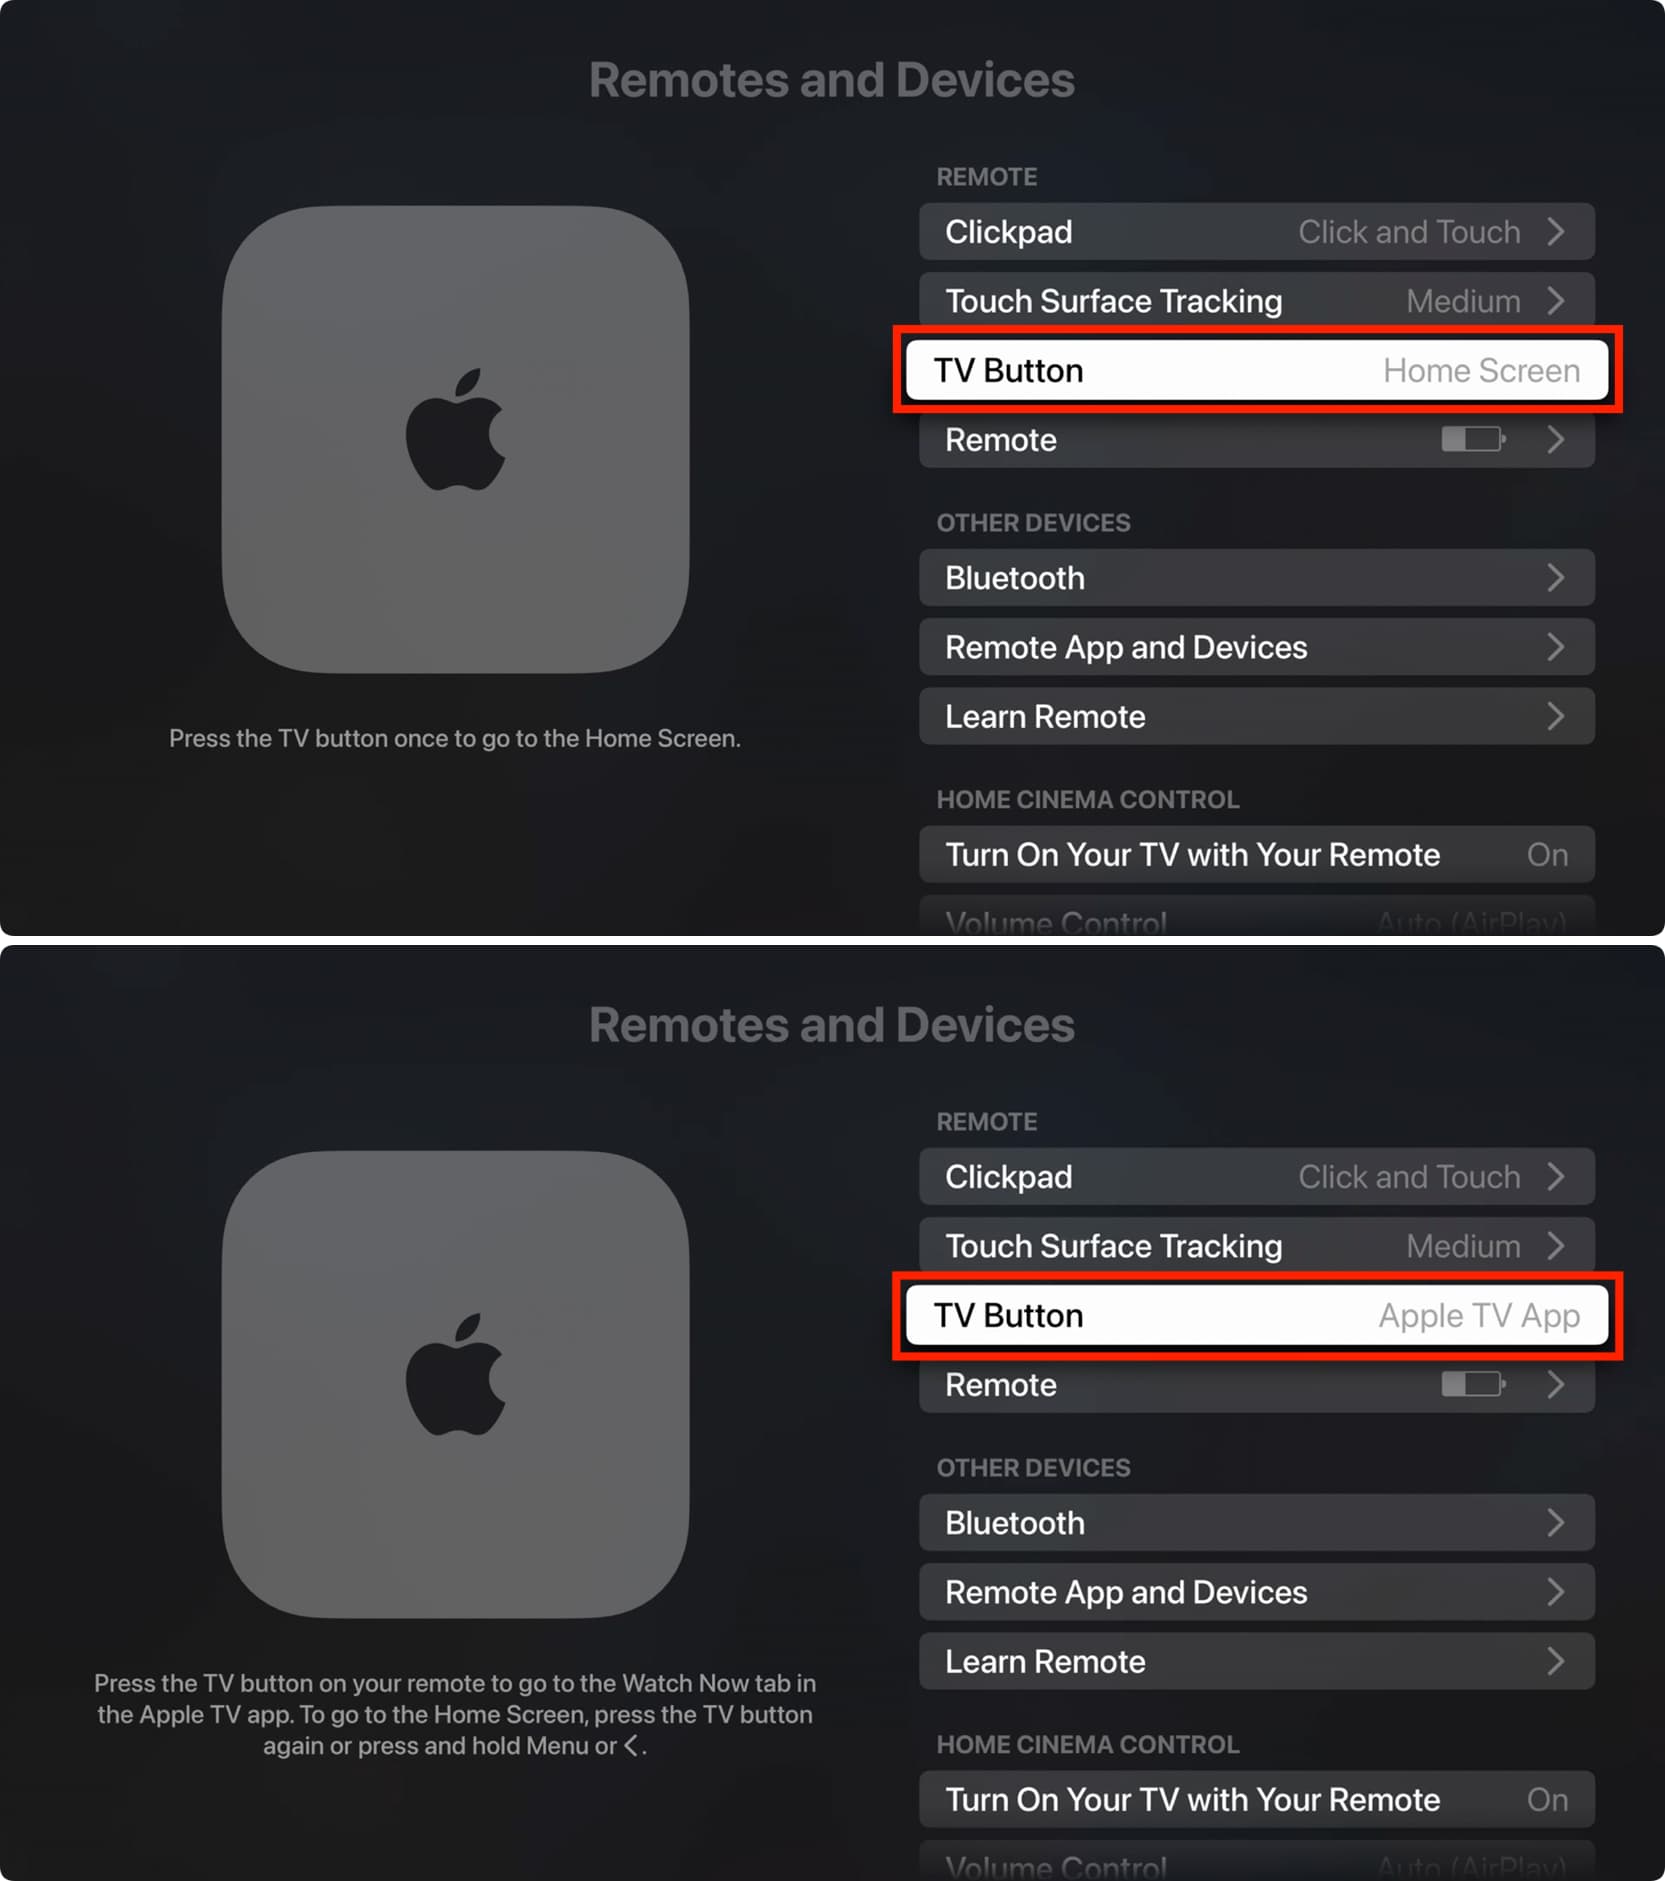 Customizing the TV Button settings for Siri Remote